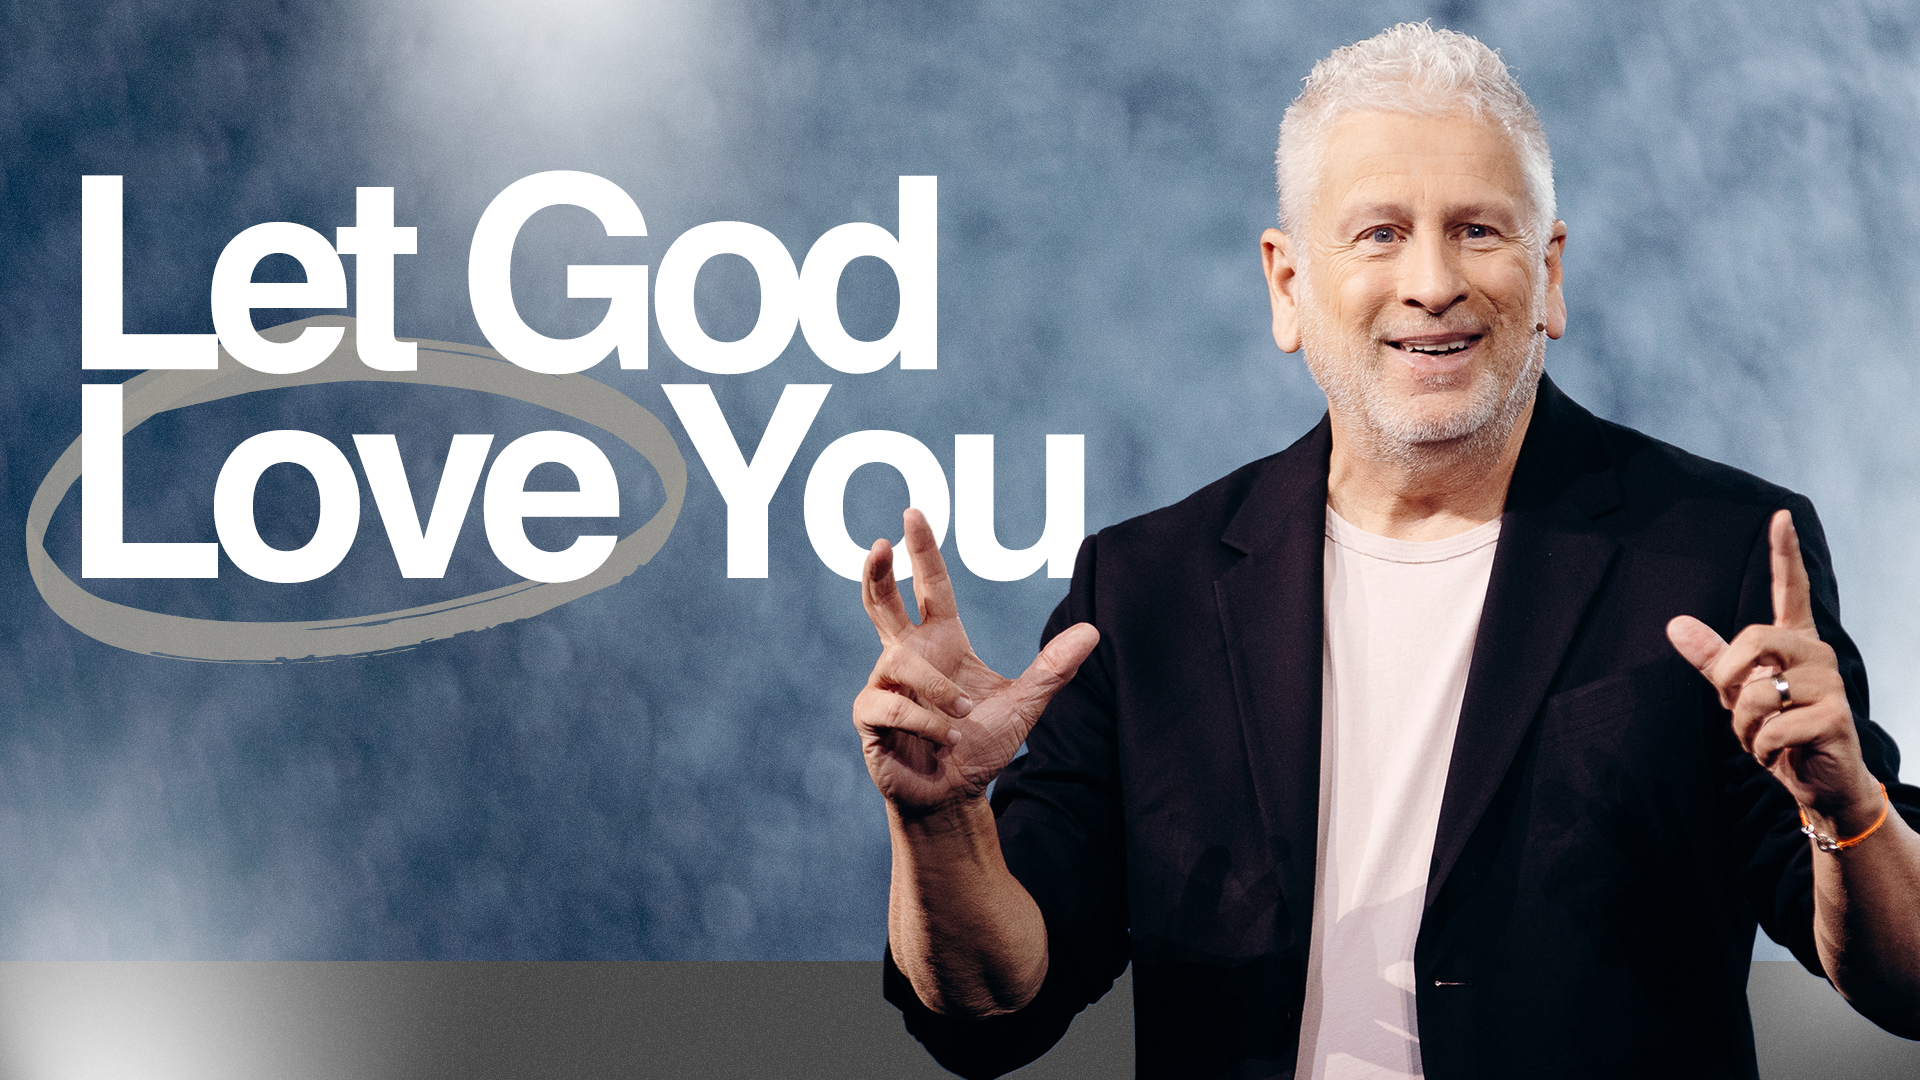 About Louie Giglio